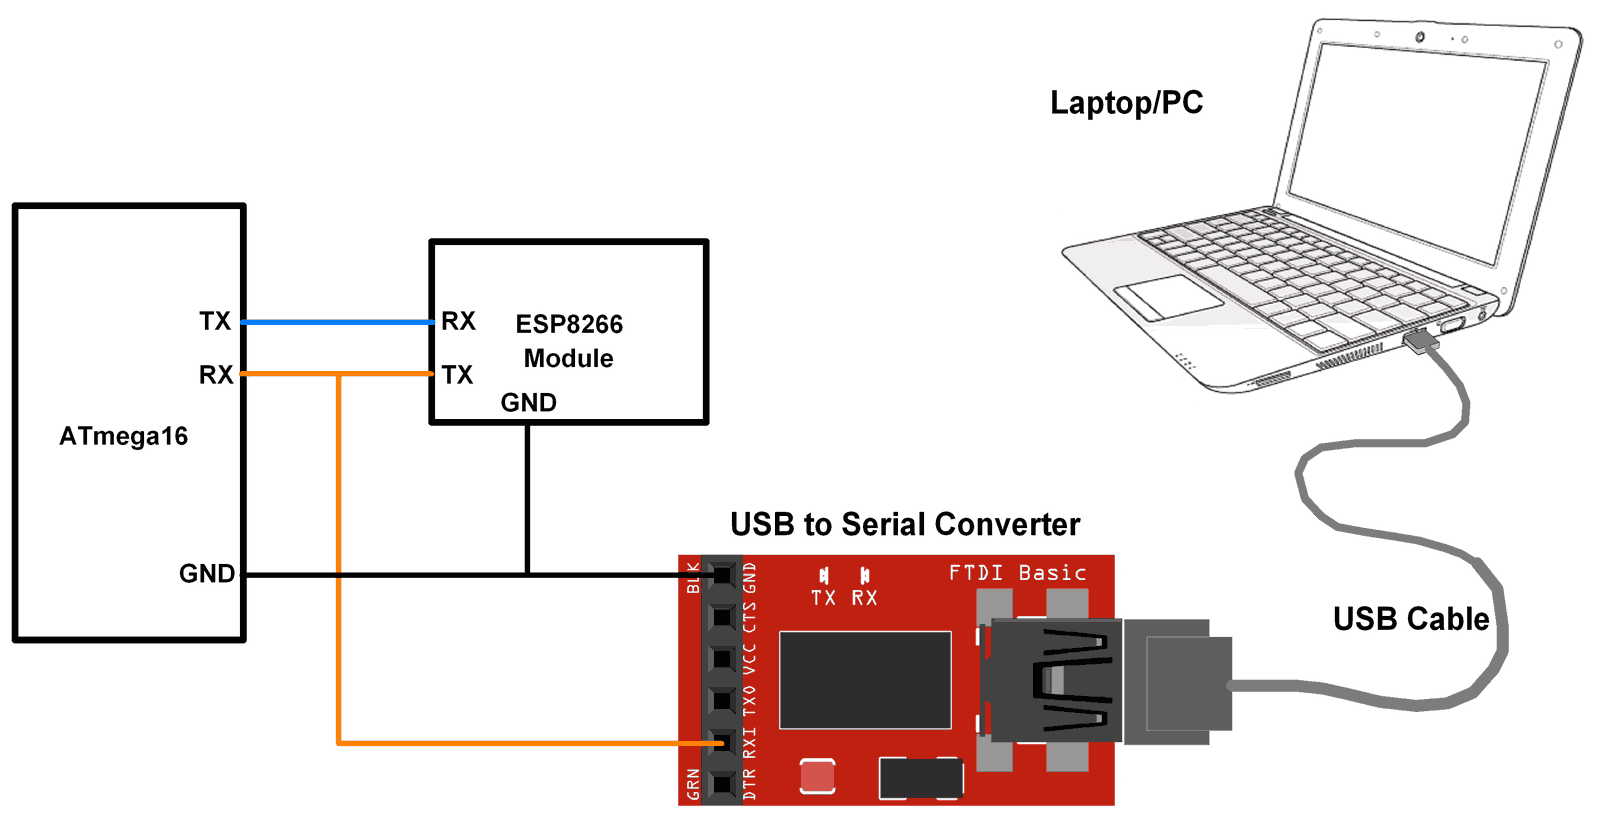 ATmega16 Interface with ESP8266 along with PC